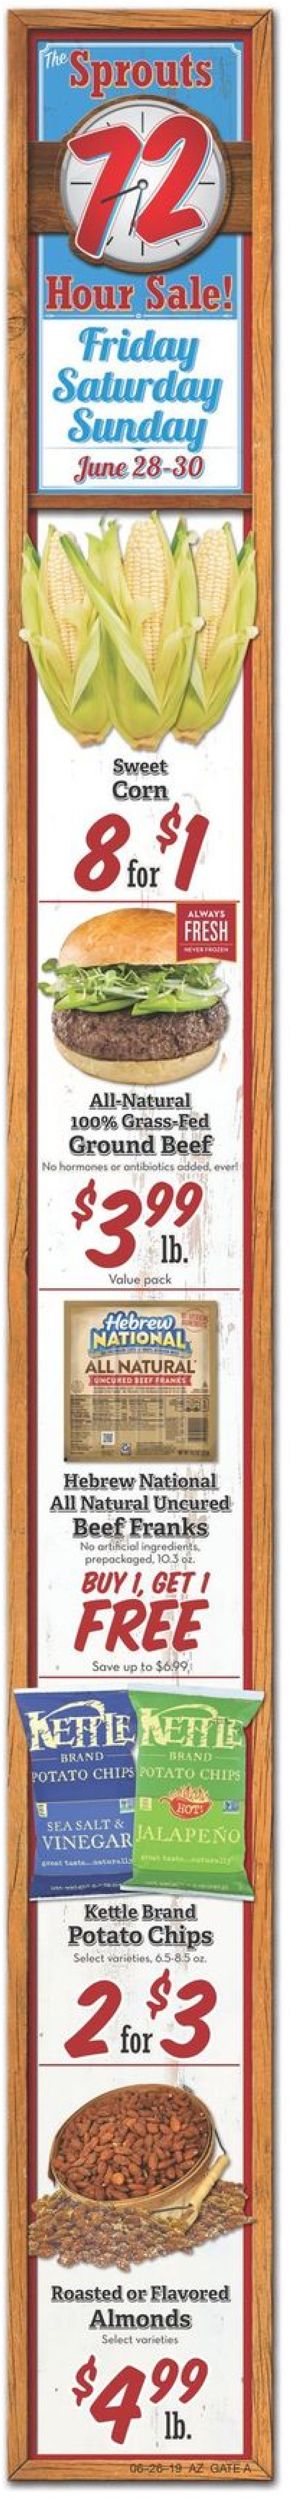 Sprouts Weekly Ad Circular - valid 06/26-07/03/2019 (Page 2)